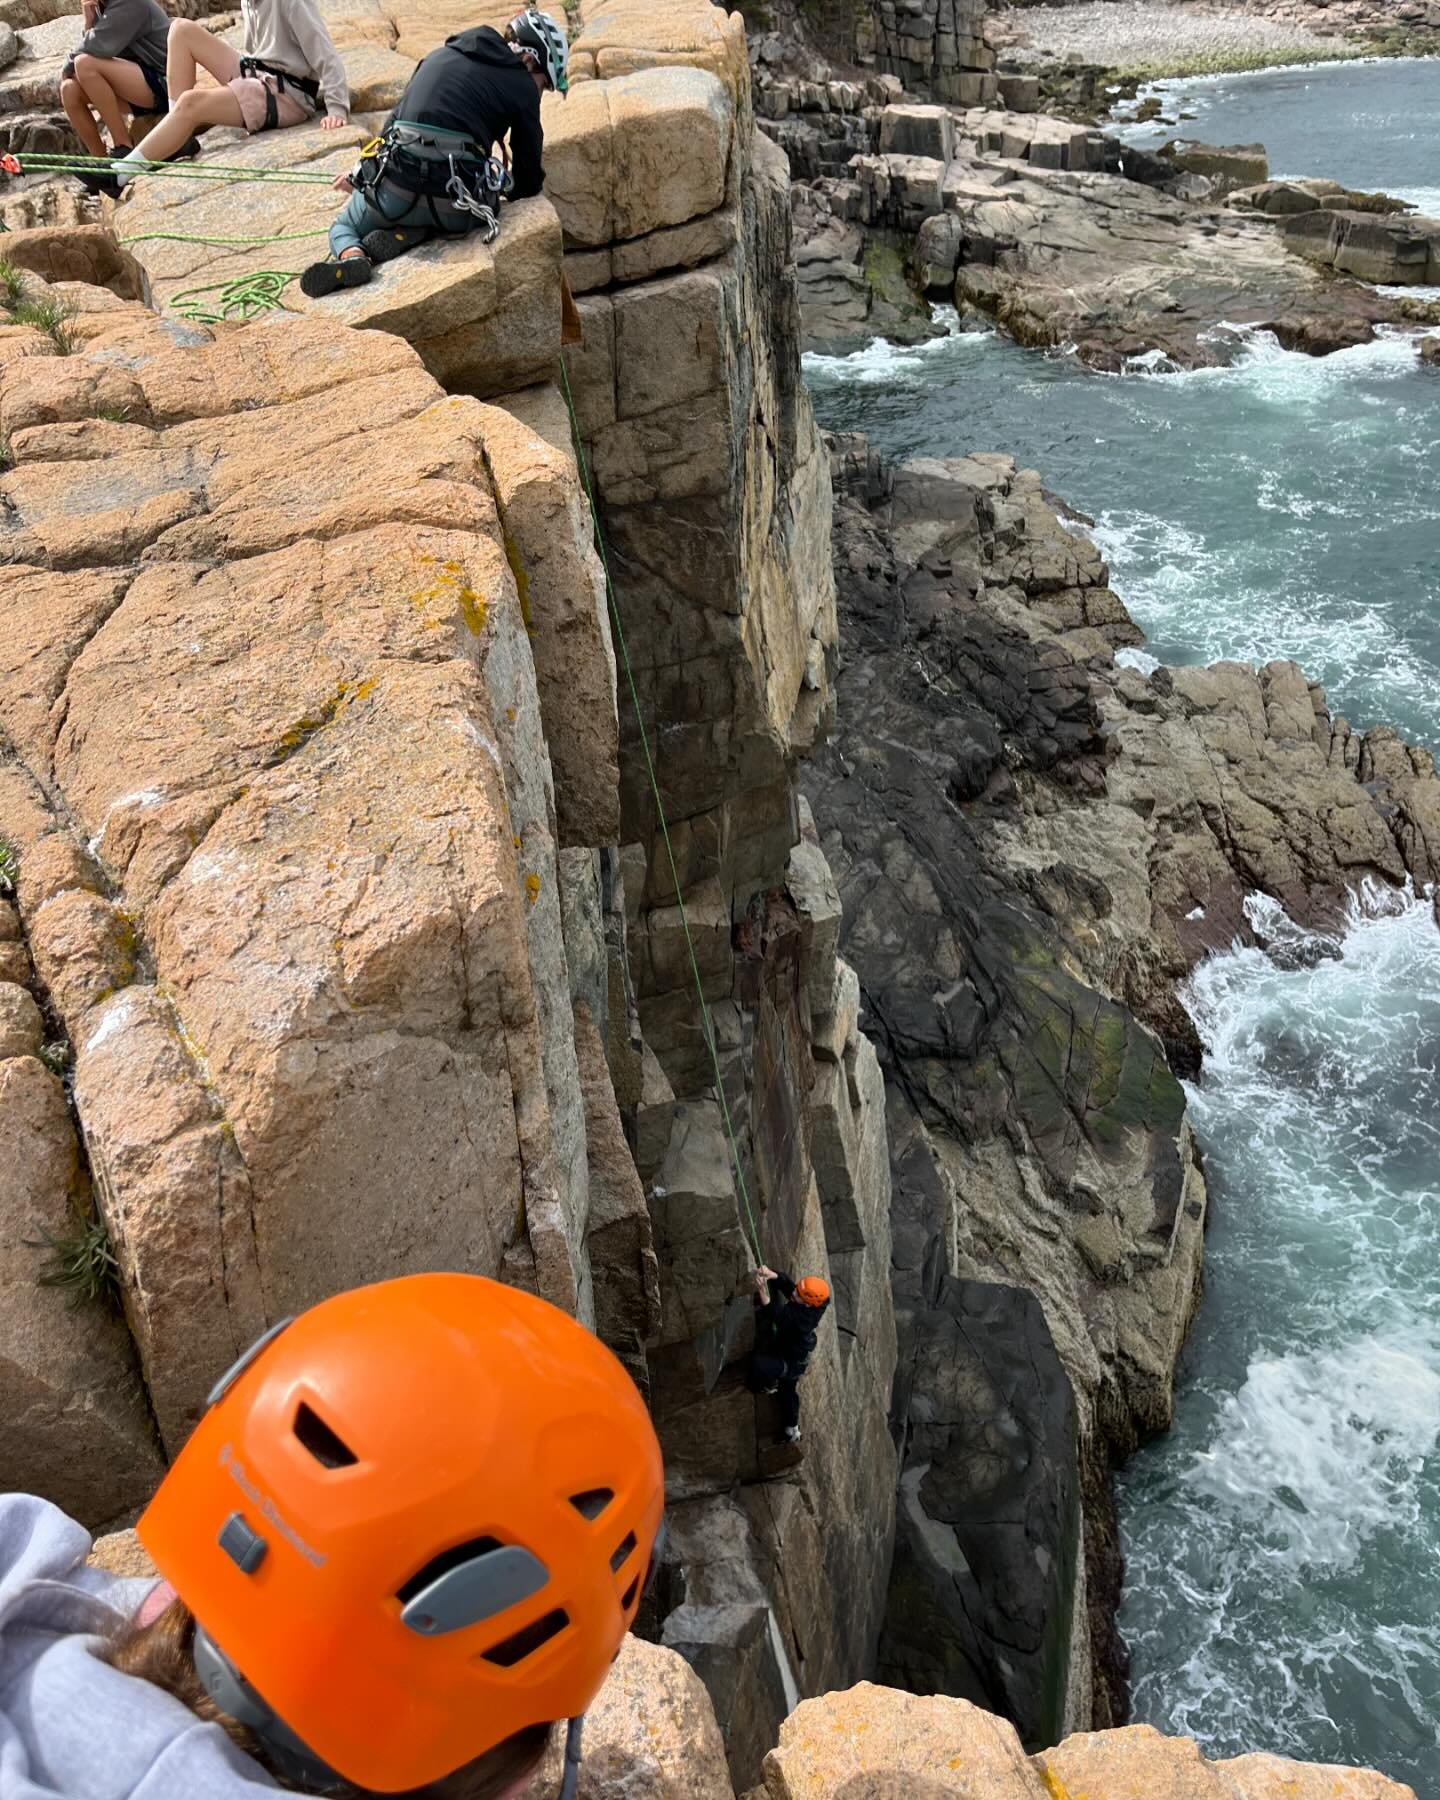 What a fantastic weekend! We&rsquo;re thrilled to see so many guests eager to climb with us again this summer. Huge thanks to @cvaalpine for joining us in Acadia! Make sure to book your spot soon if you want to climb with us this summer. #ClimbAcadia